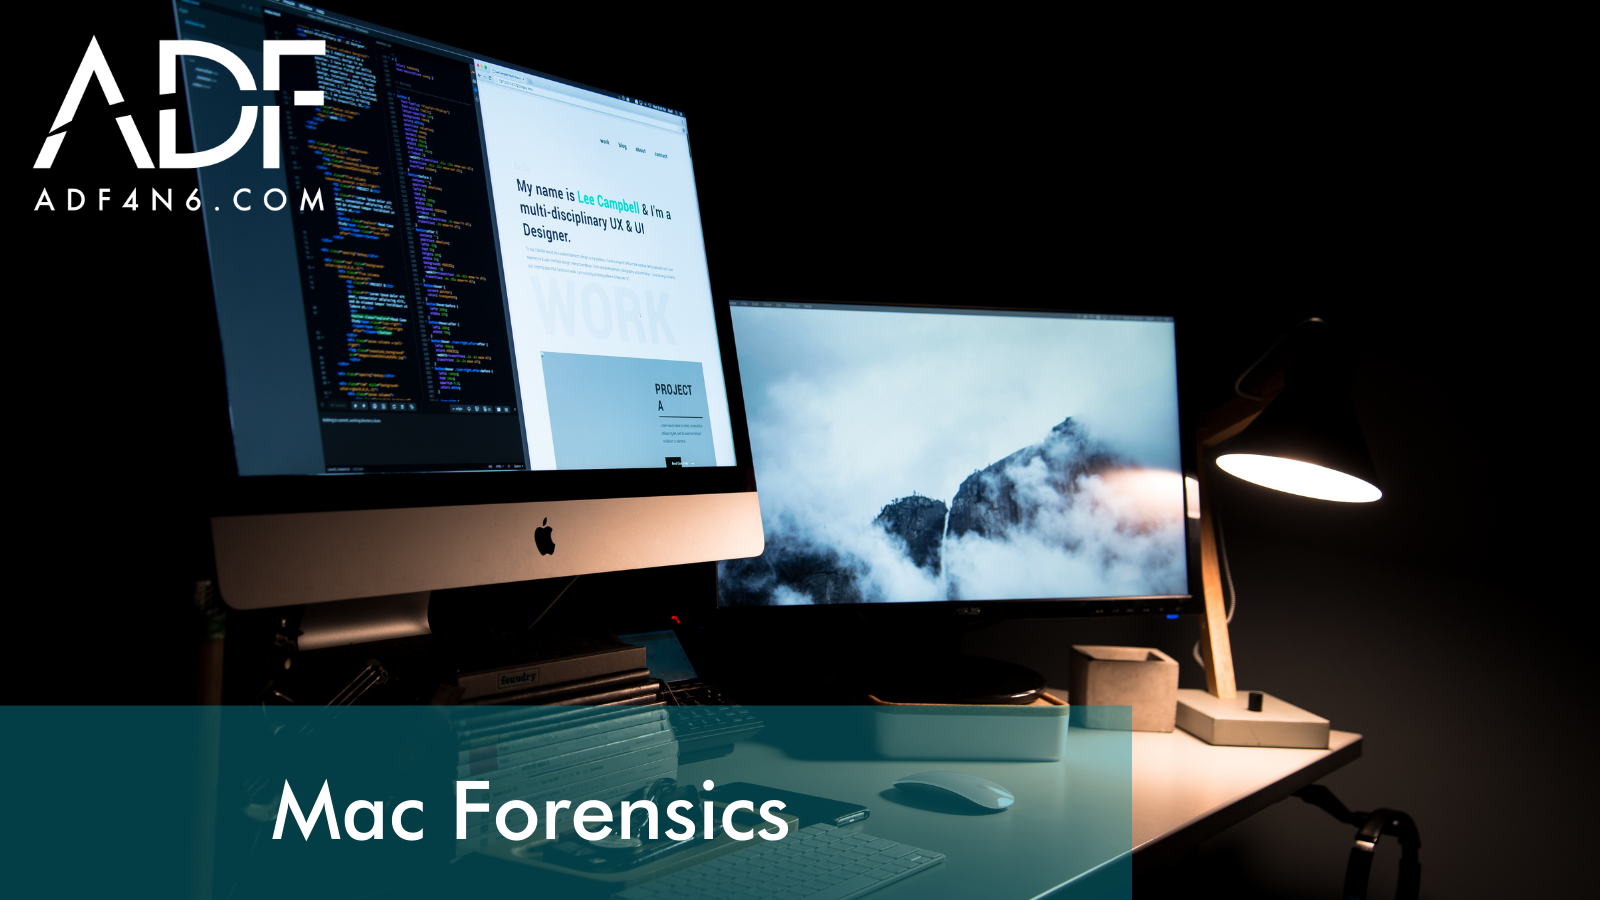 Mac Forensics: Learn to acquire digital evidence on MacOS computers